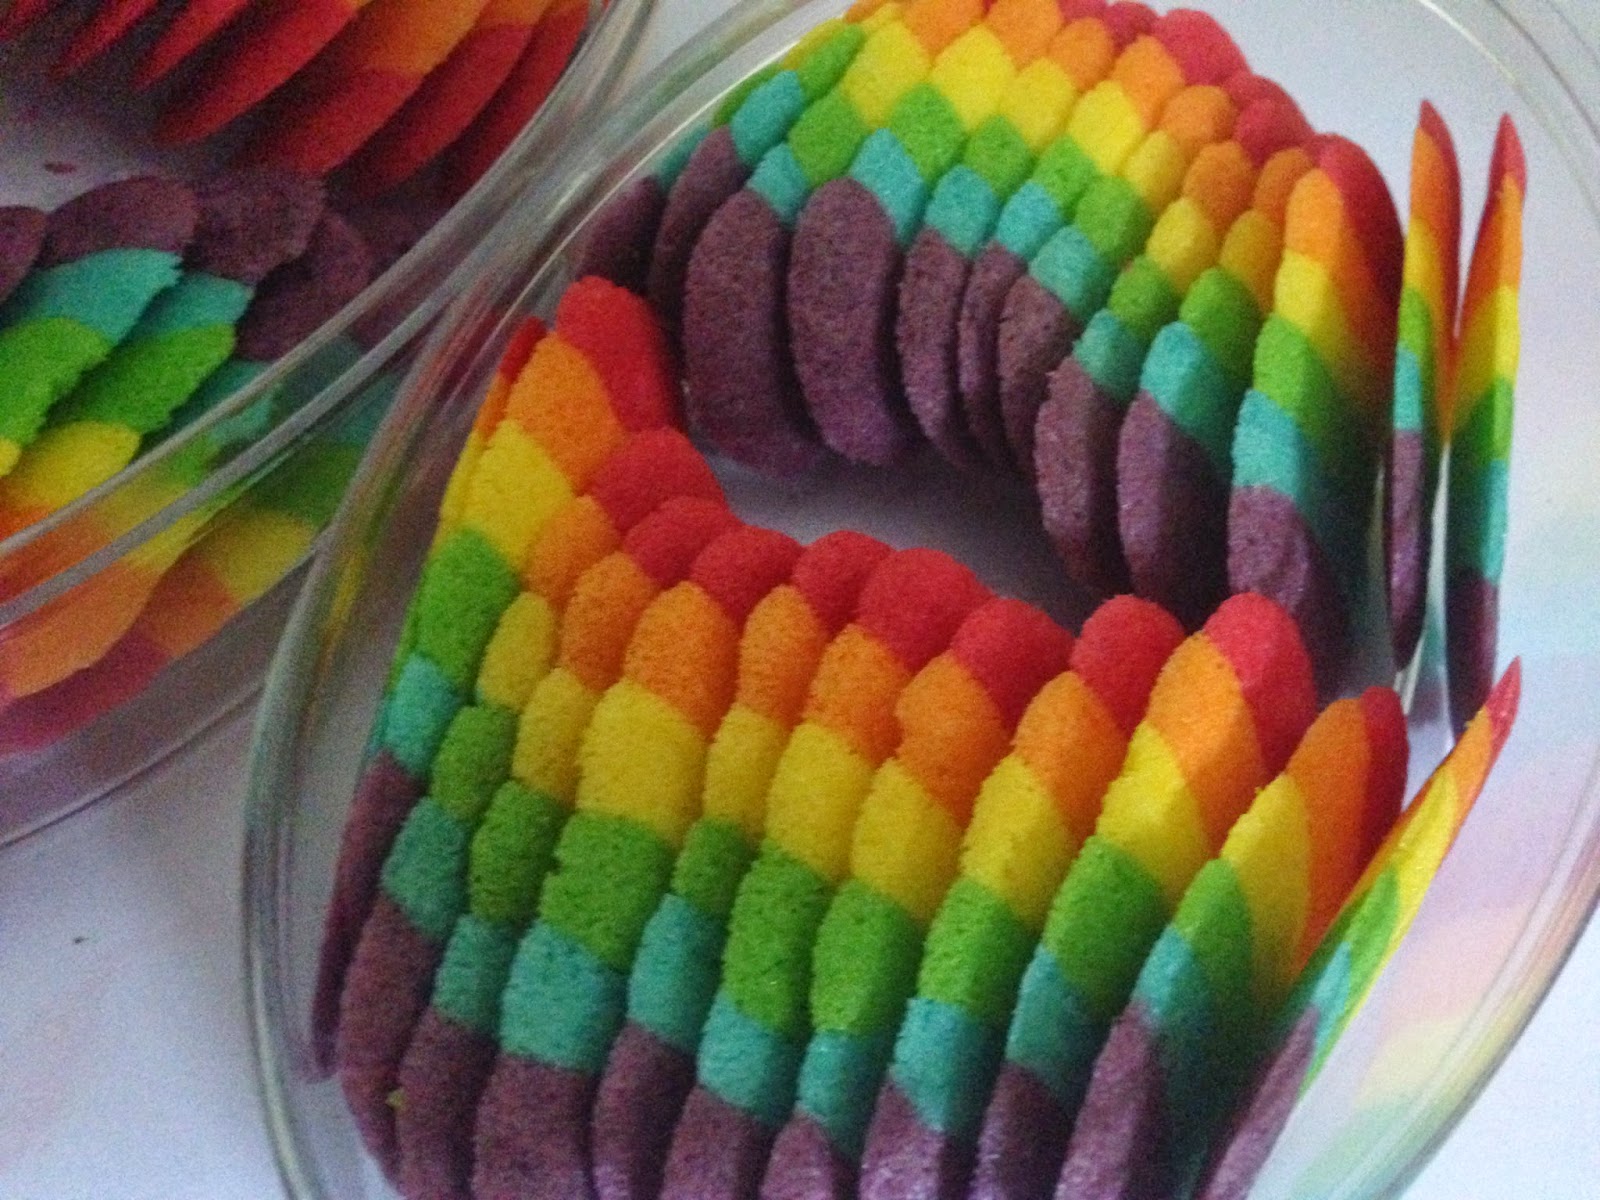 ninie cakes house: Super Delicious Rainbow Cookies @ Cat Tongue by Ninie